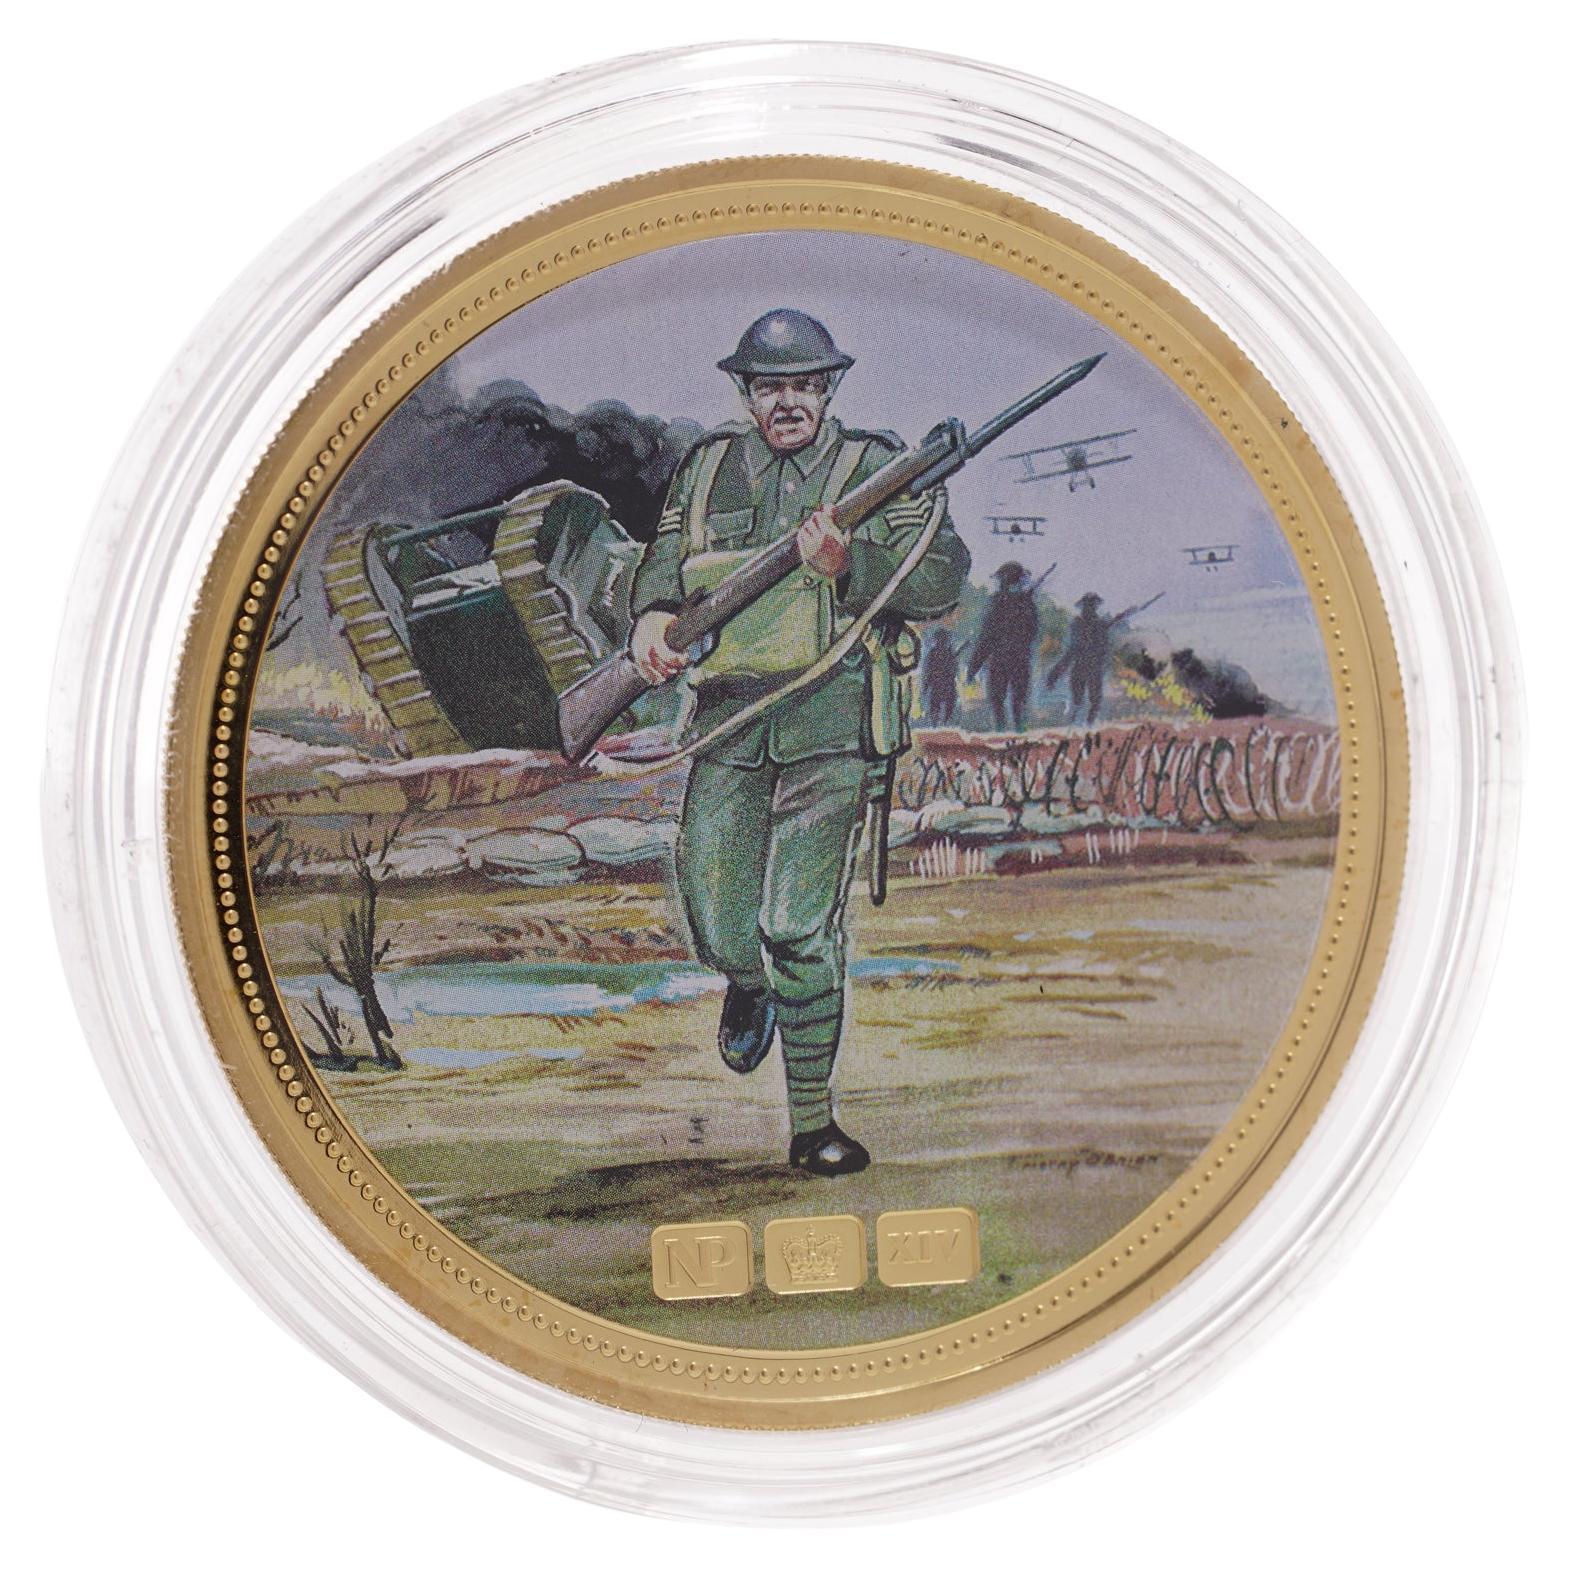 A 9ct gold proof coin, commemorating the First World War centenary